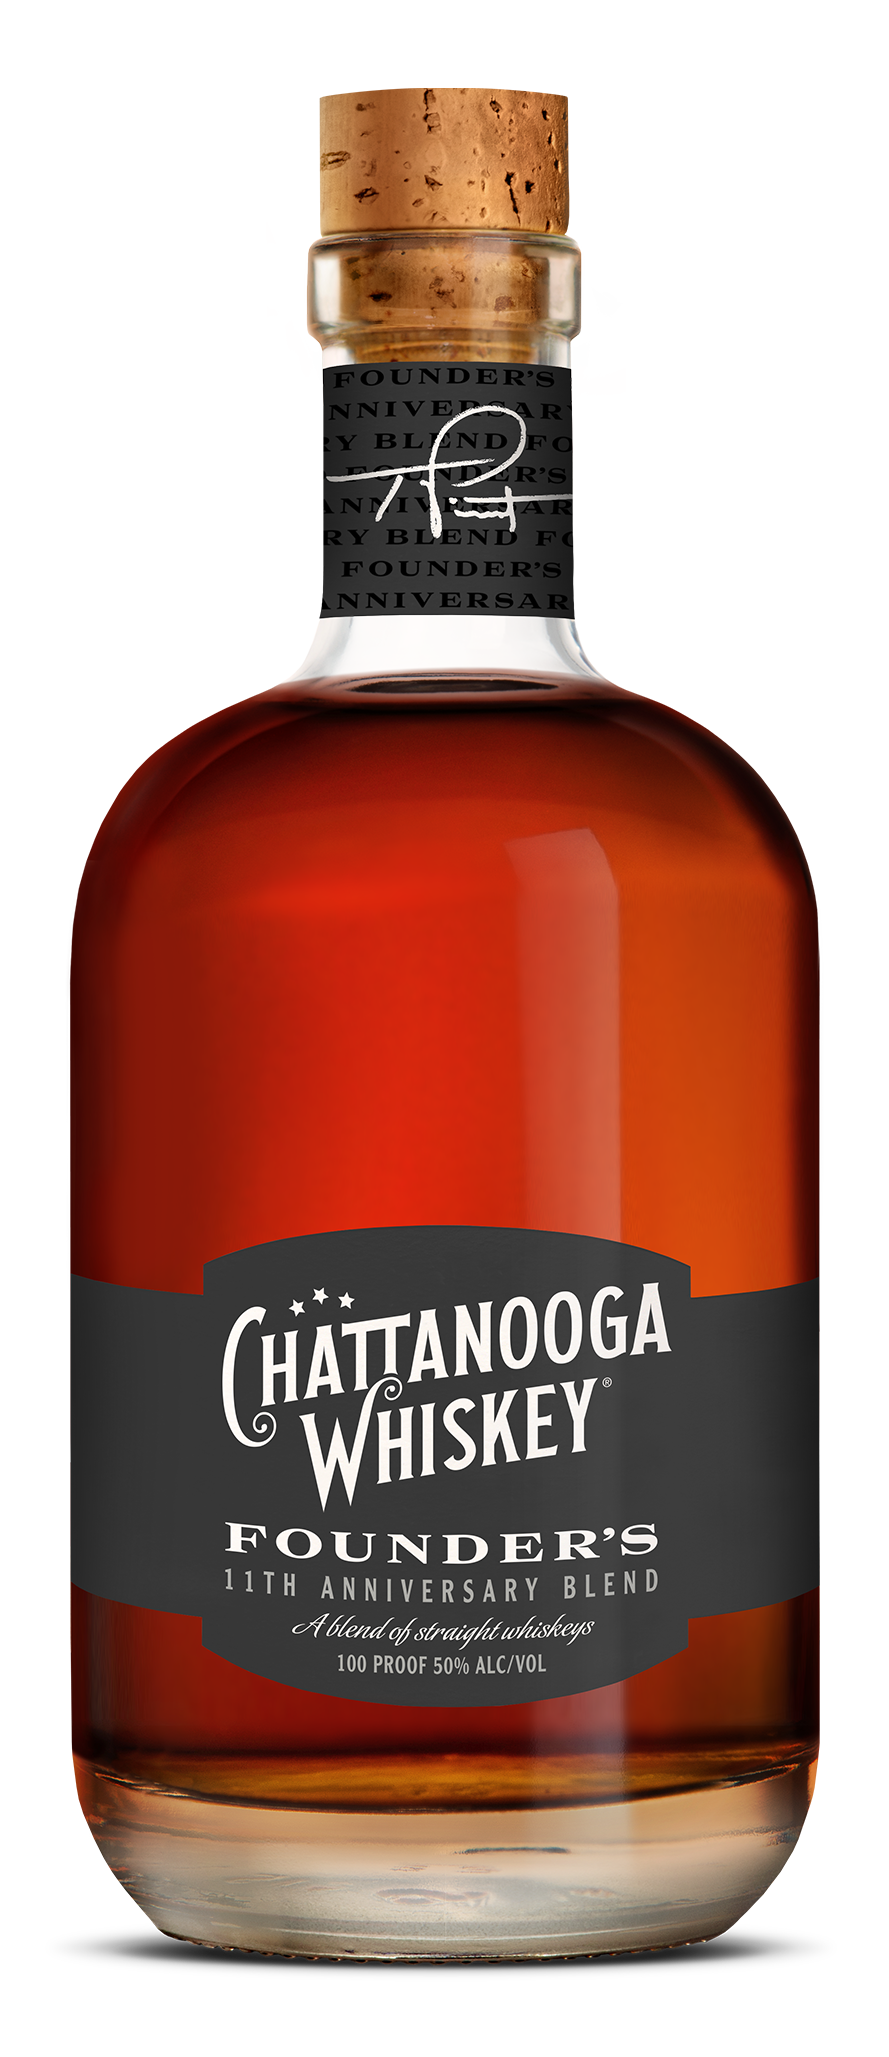 Chattanooga Whiskey Founder's 11th Anniversary Blend